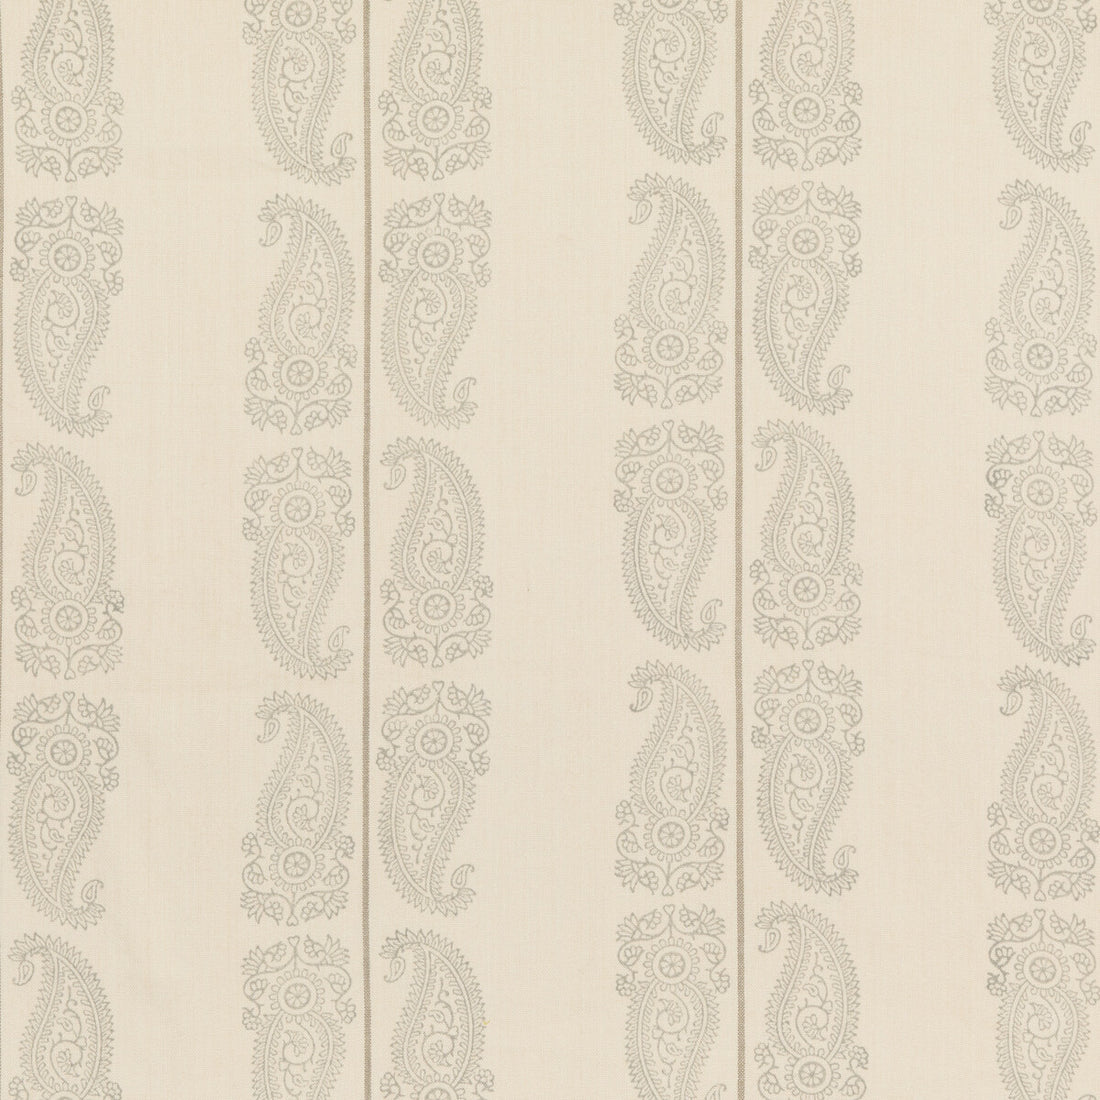 Cromer Paisley fabric in dove color - pattern BP10796.3.0 - by G P &amp; J Baker in the Artisan II collection